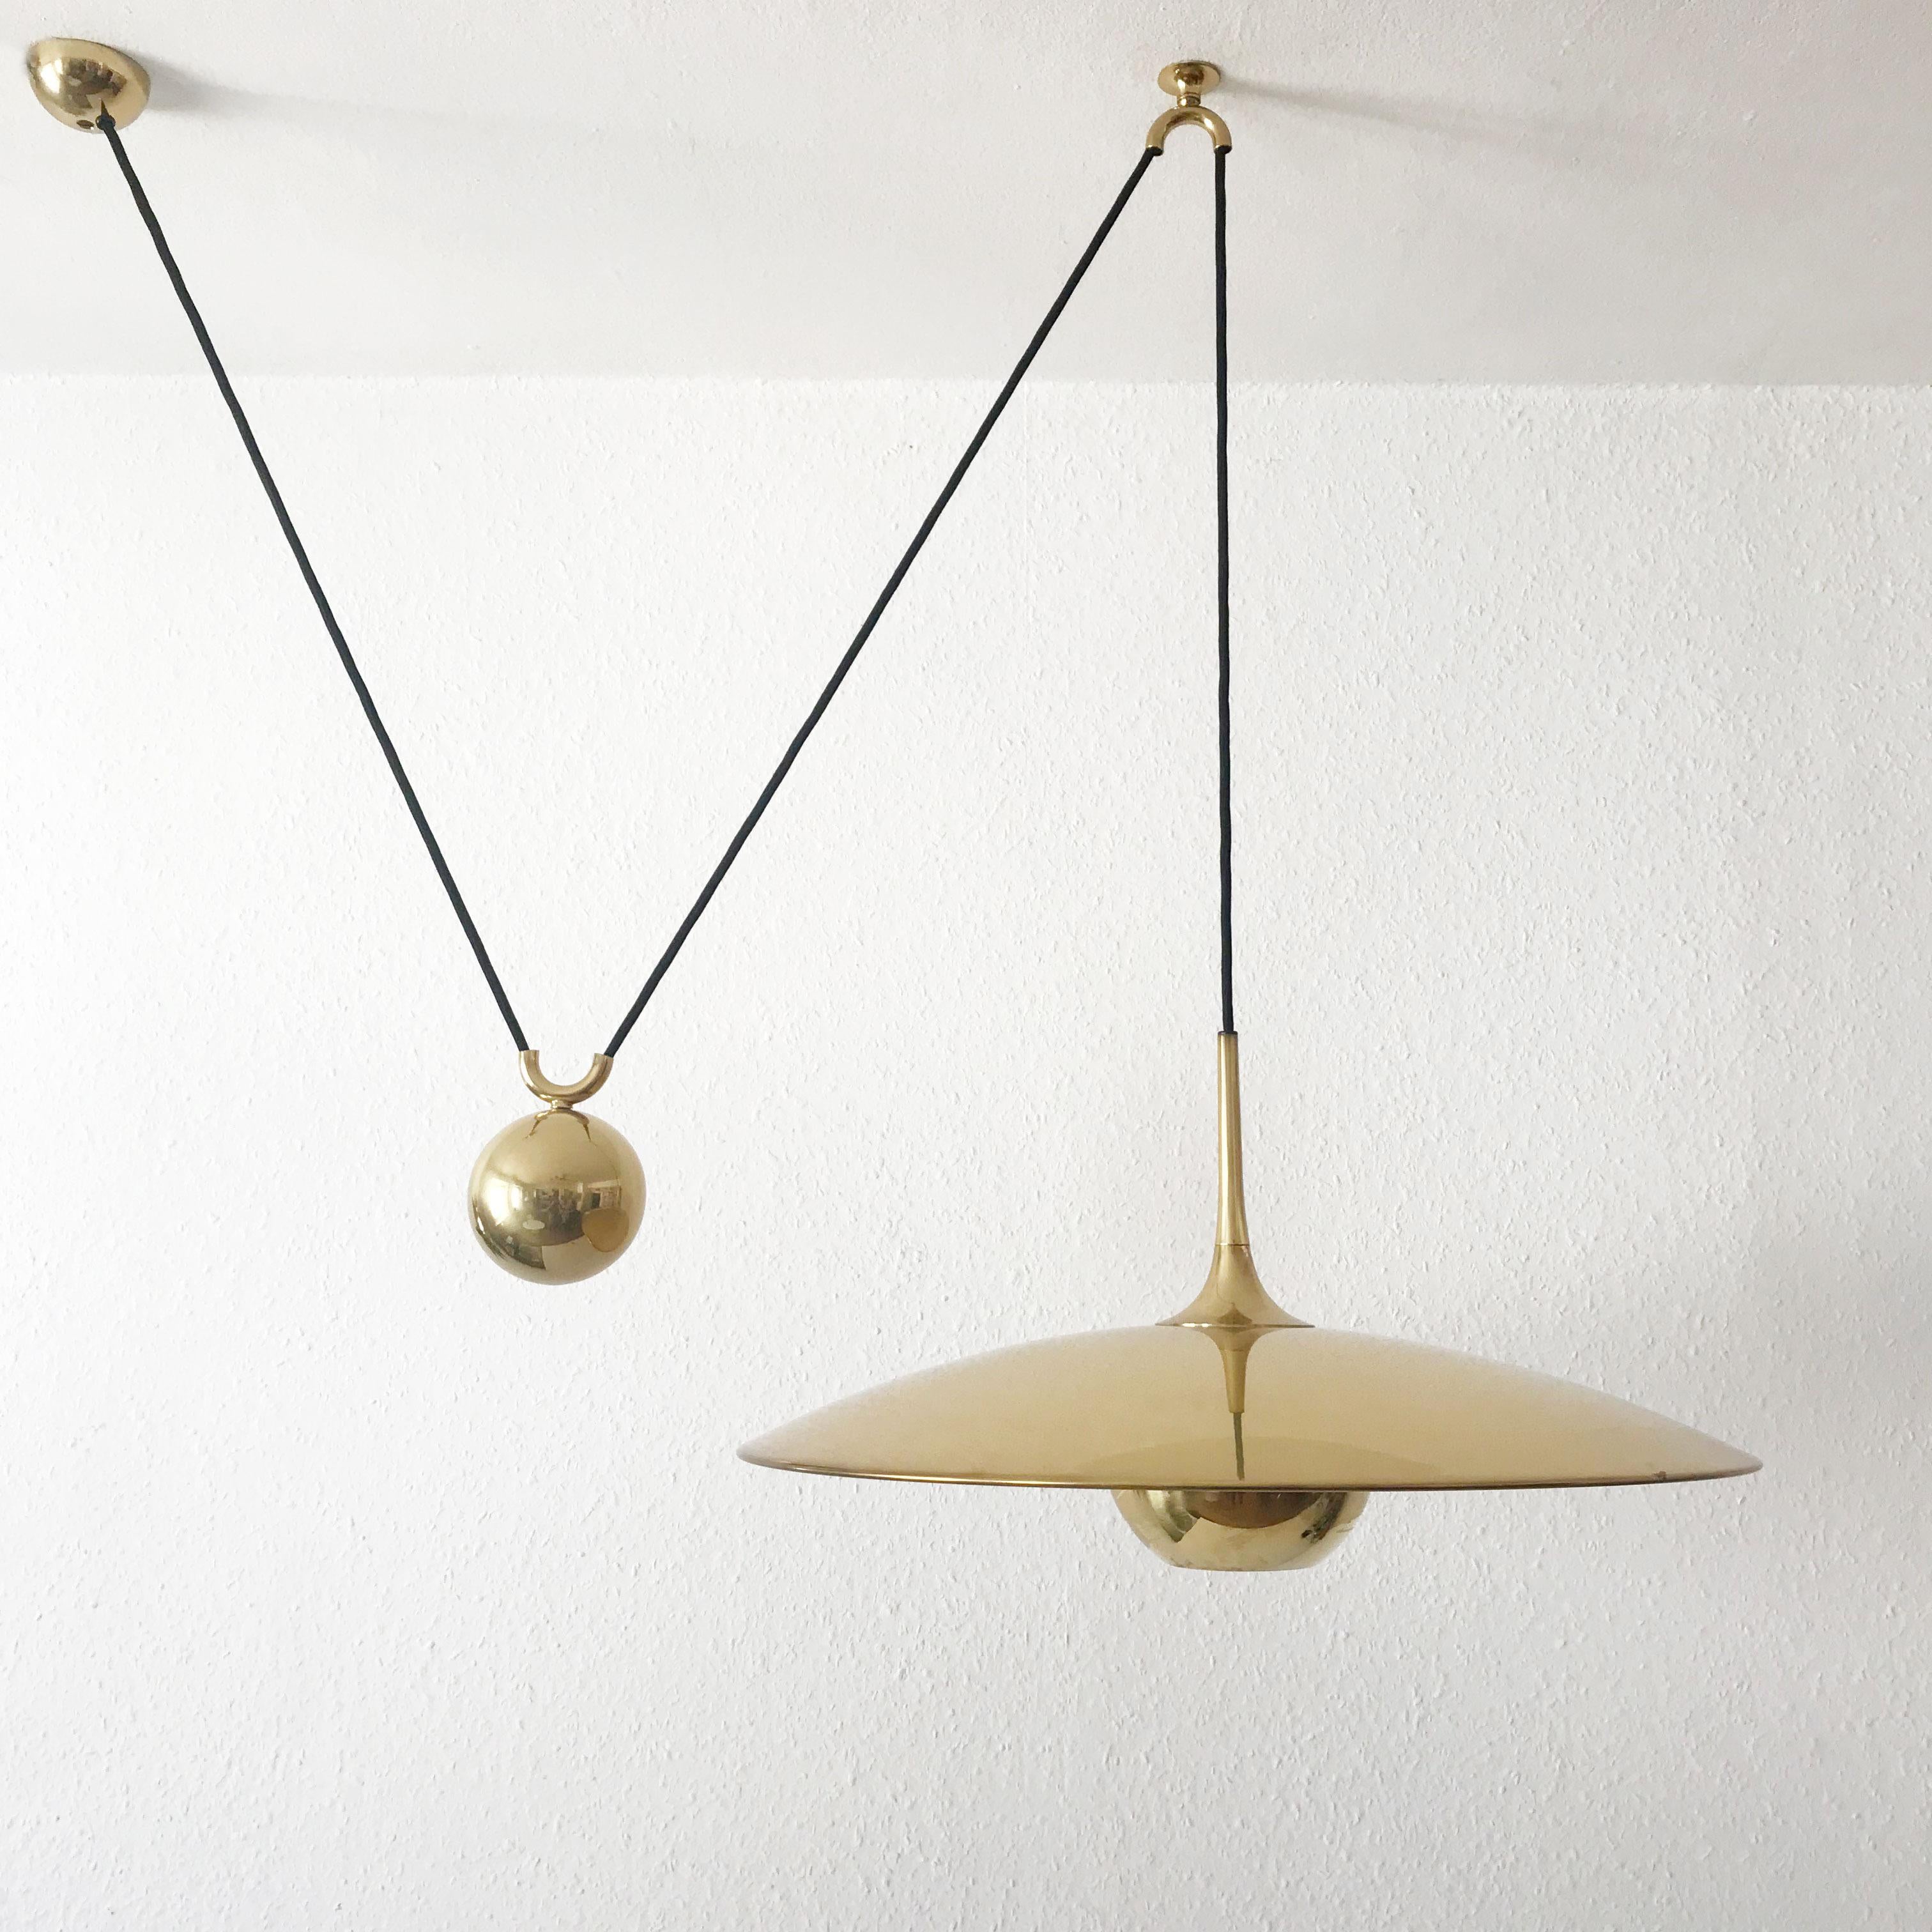 Brass Counter Balance Pendant Lamp Onos 55 by Florian Schulz, 1980s, Germany